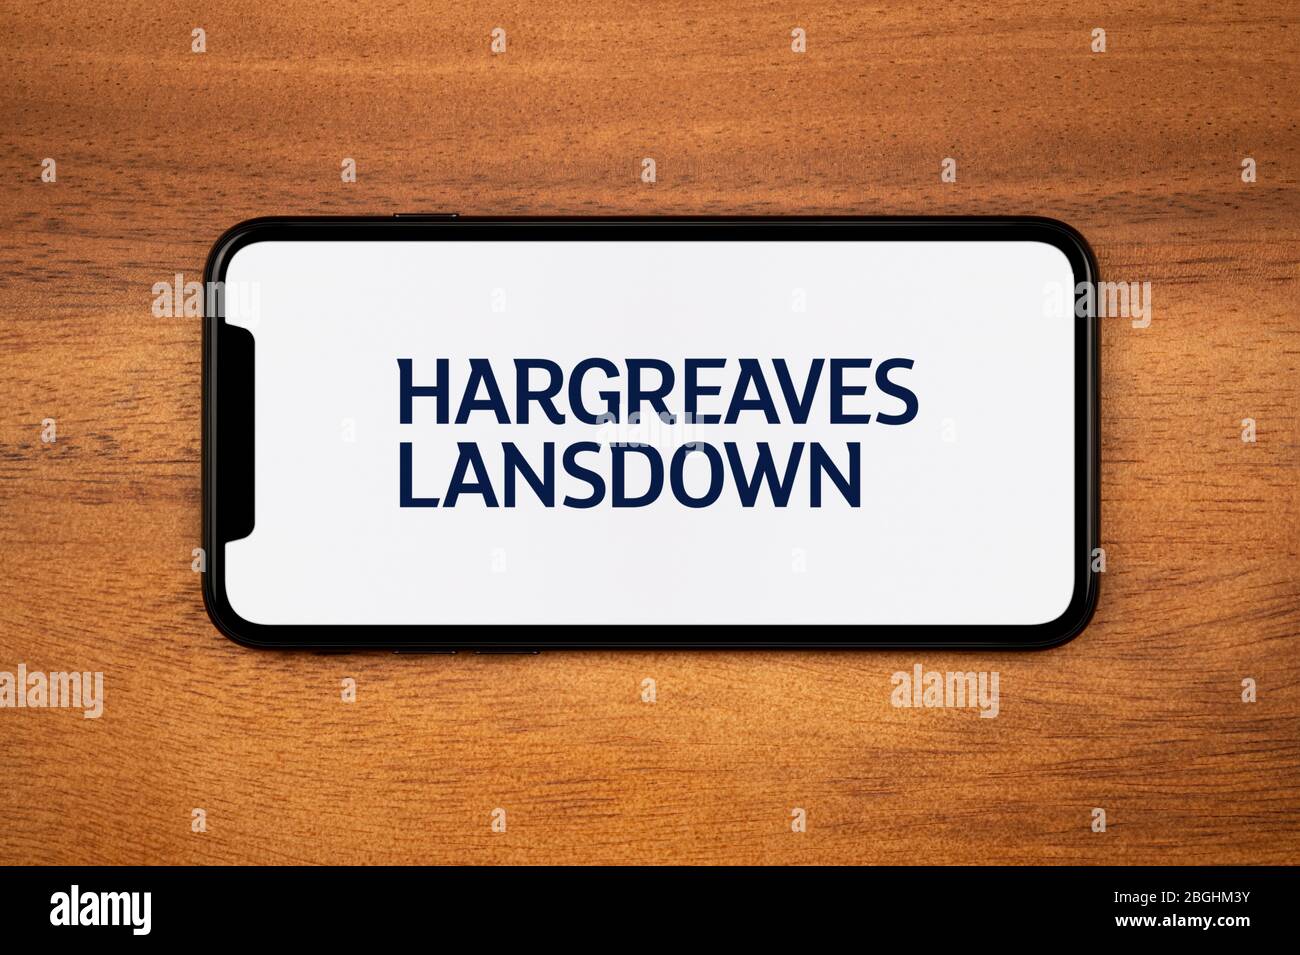 A smartphone showing the Hargreaves Lansdown logo rests on a plain wooden table (Editorial use only). Stock Photo